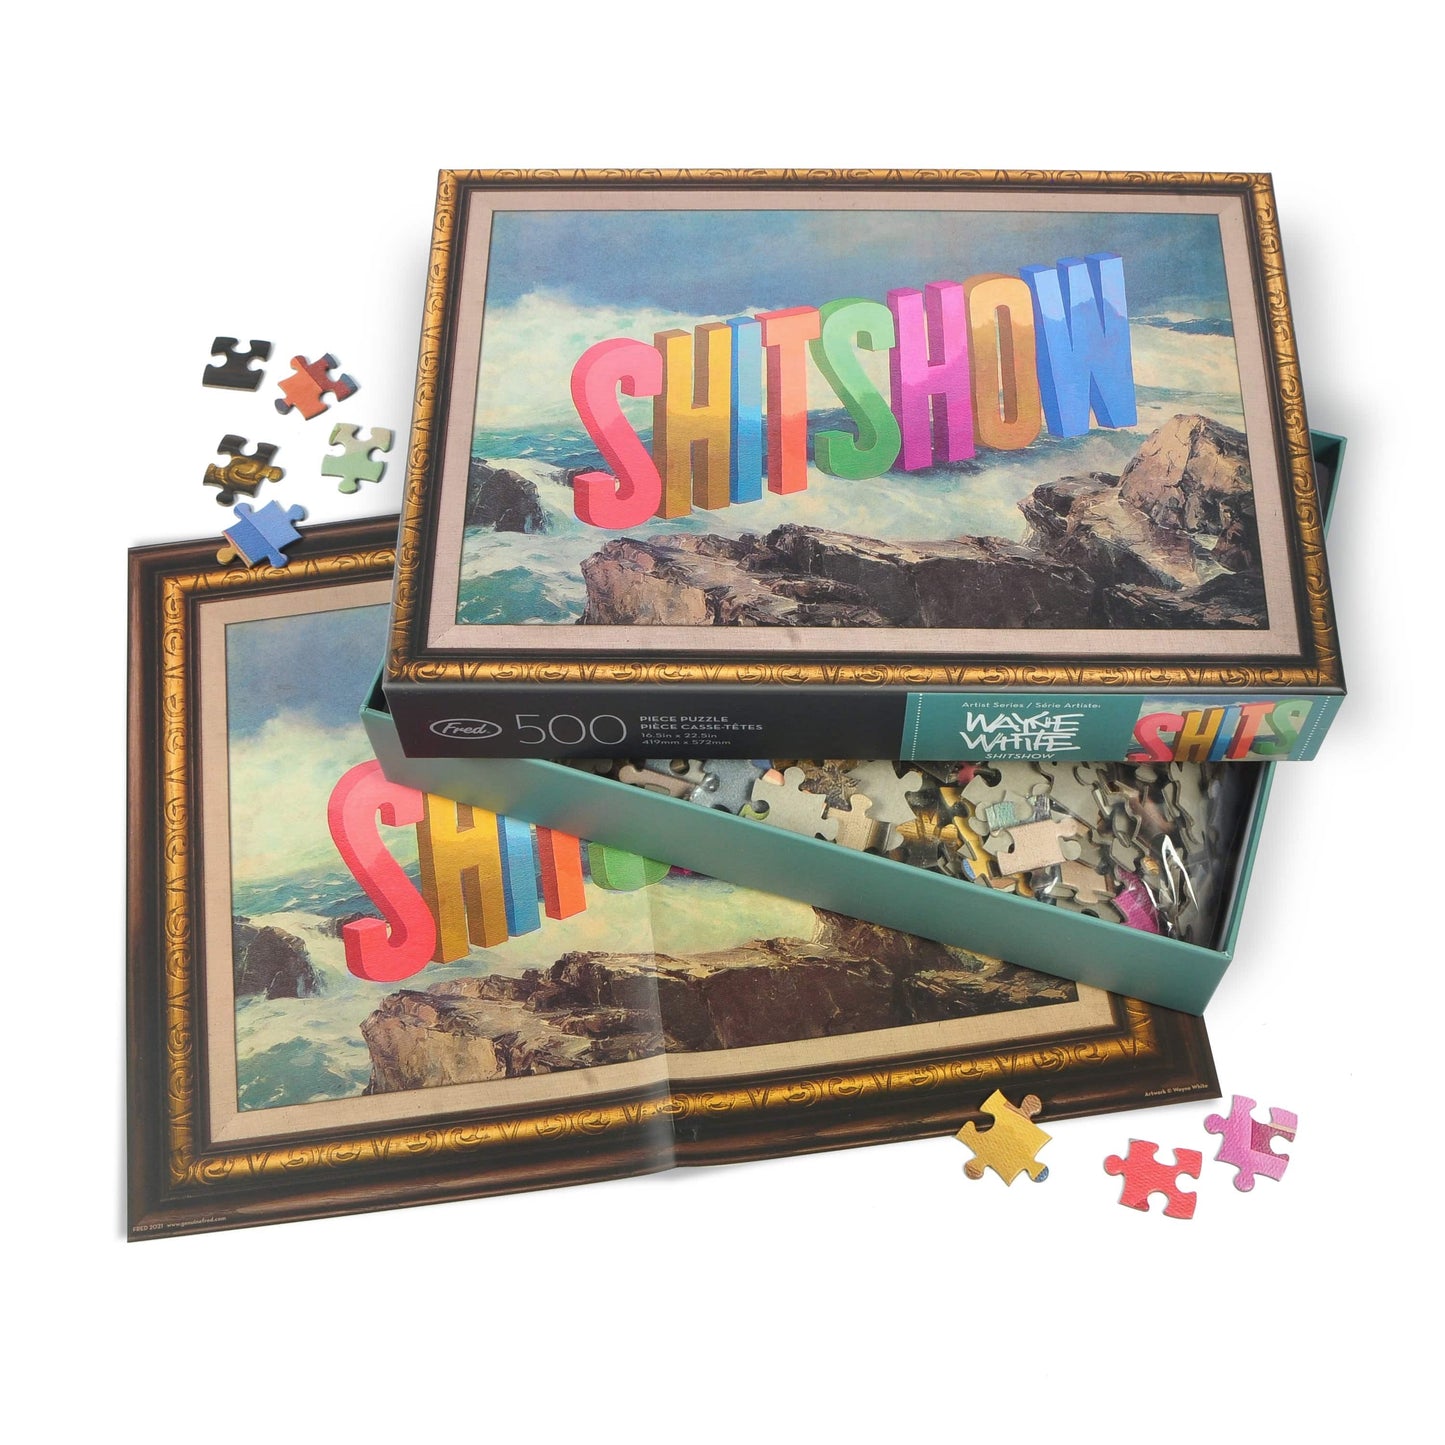 Fred & Friends Shitshow 500pc Puzzle